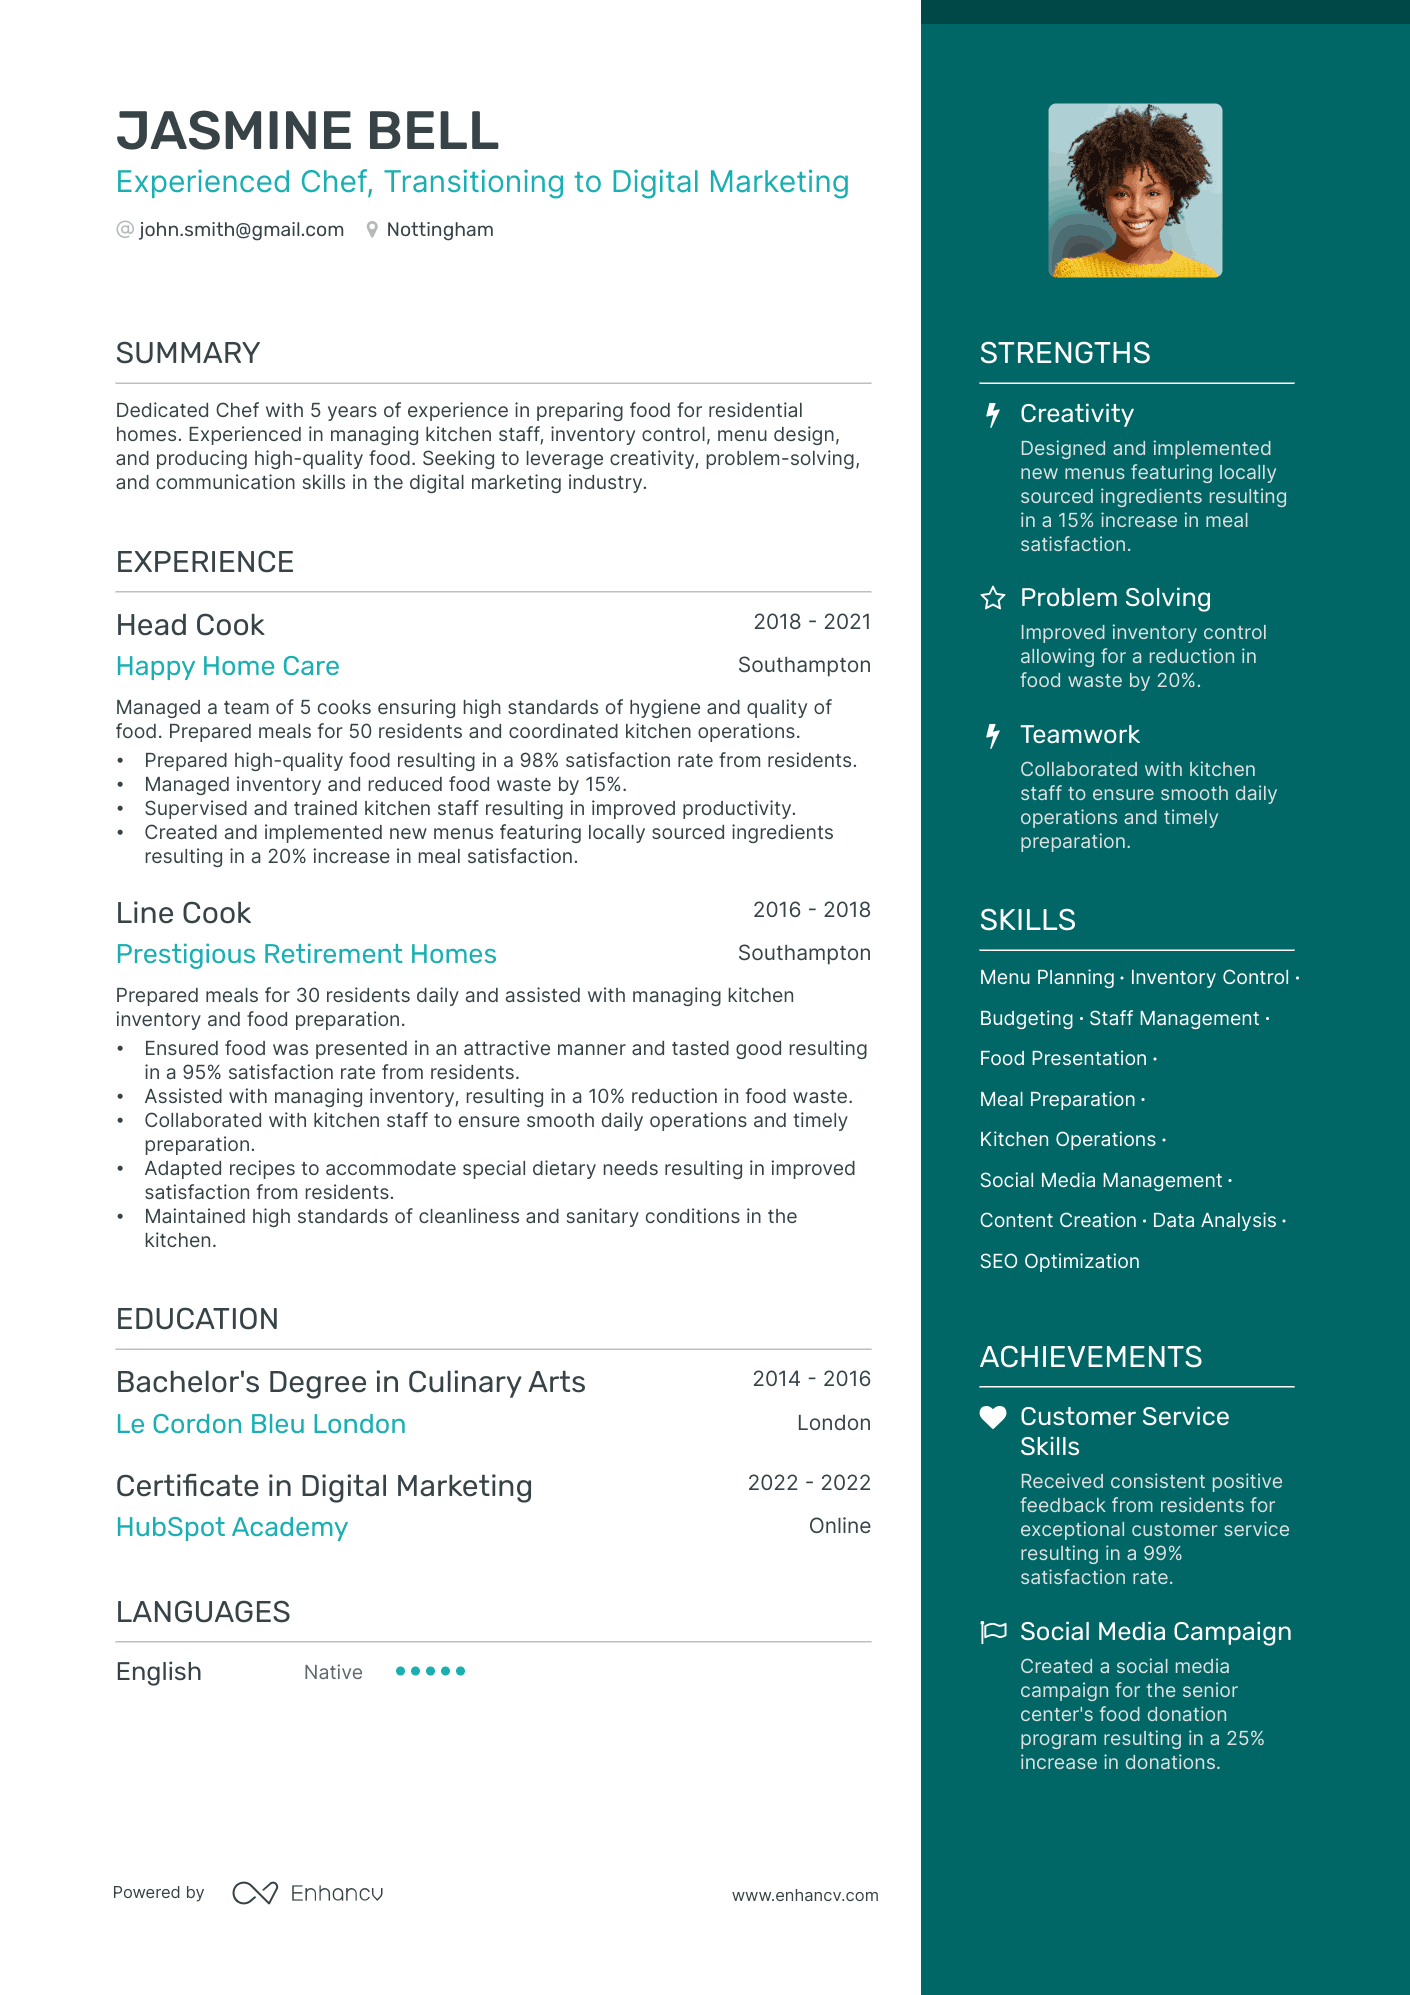 Experienced Chef, Transitioning to Digital Marketing CV example